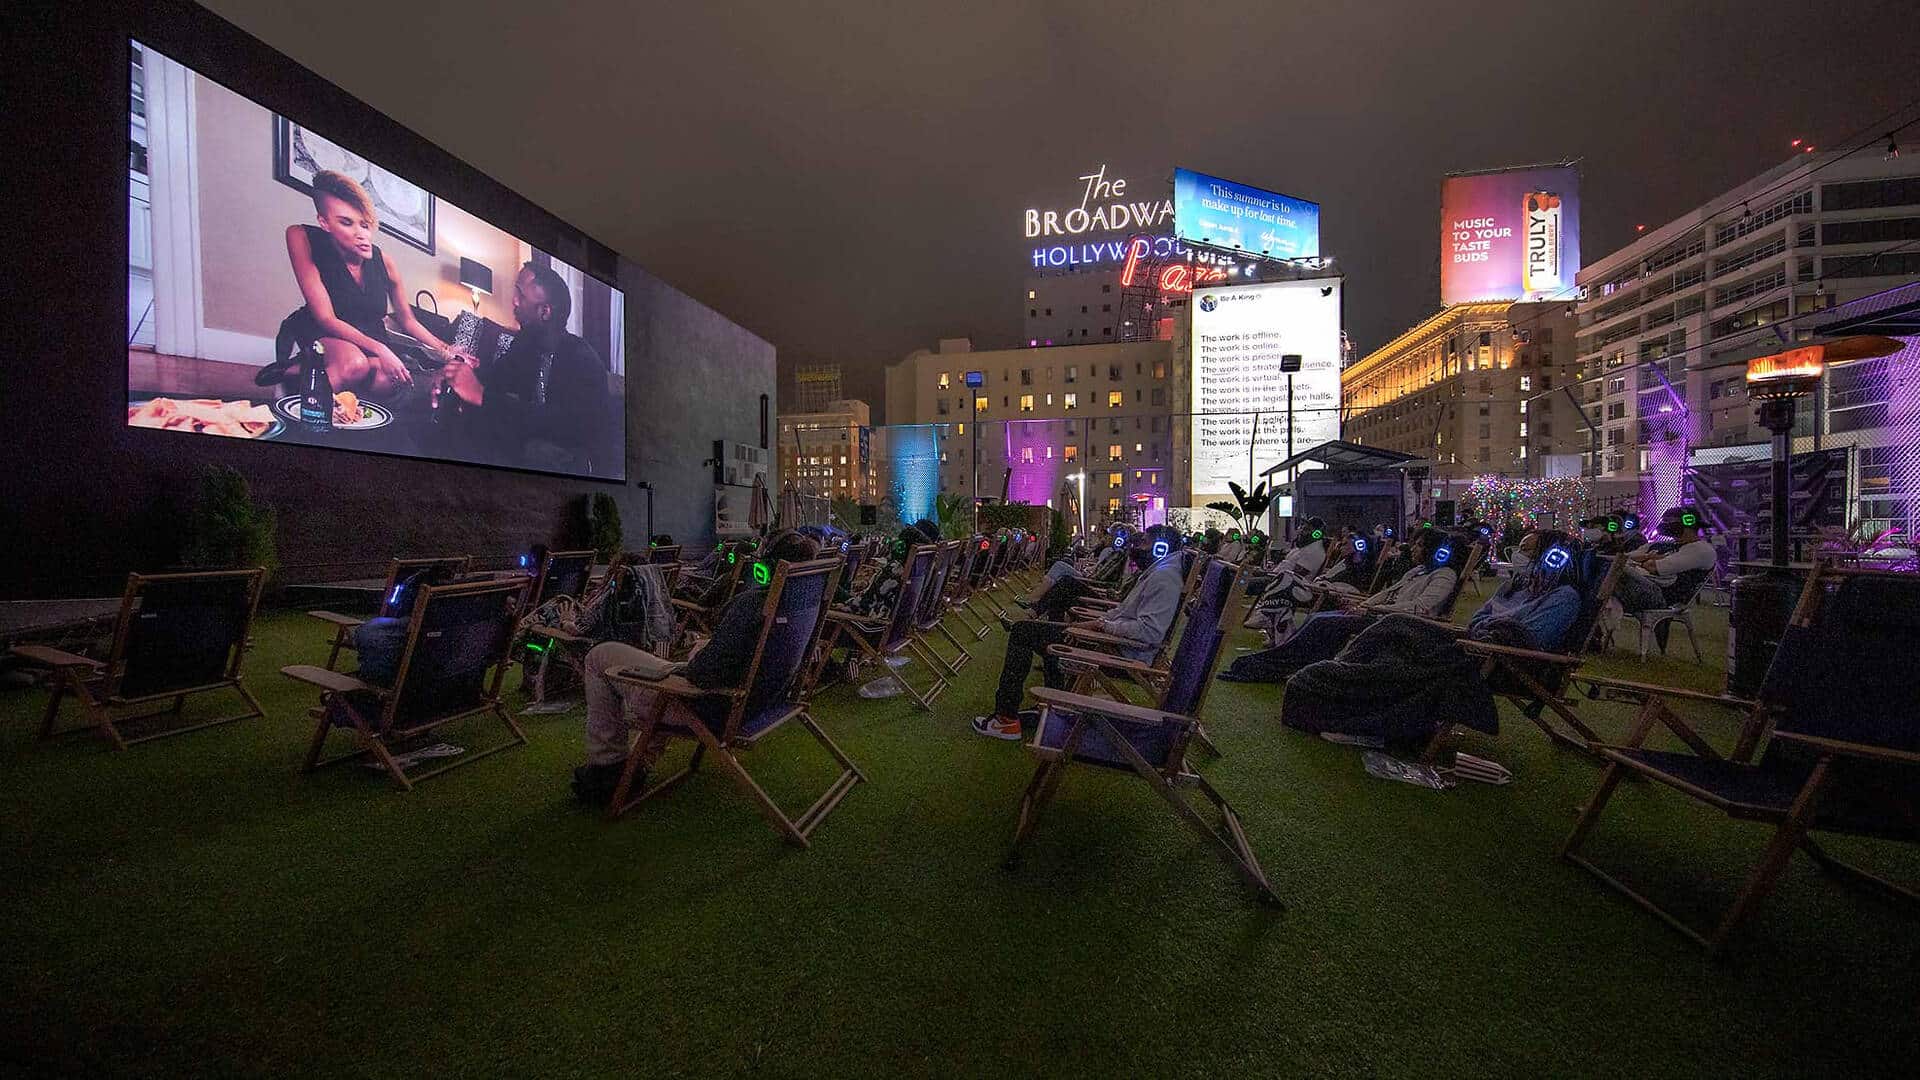 A nighttime outdoor movie screening on the rooftop of The Montalban Theatre in Hollywood. 